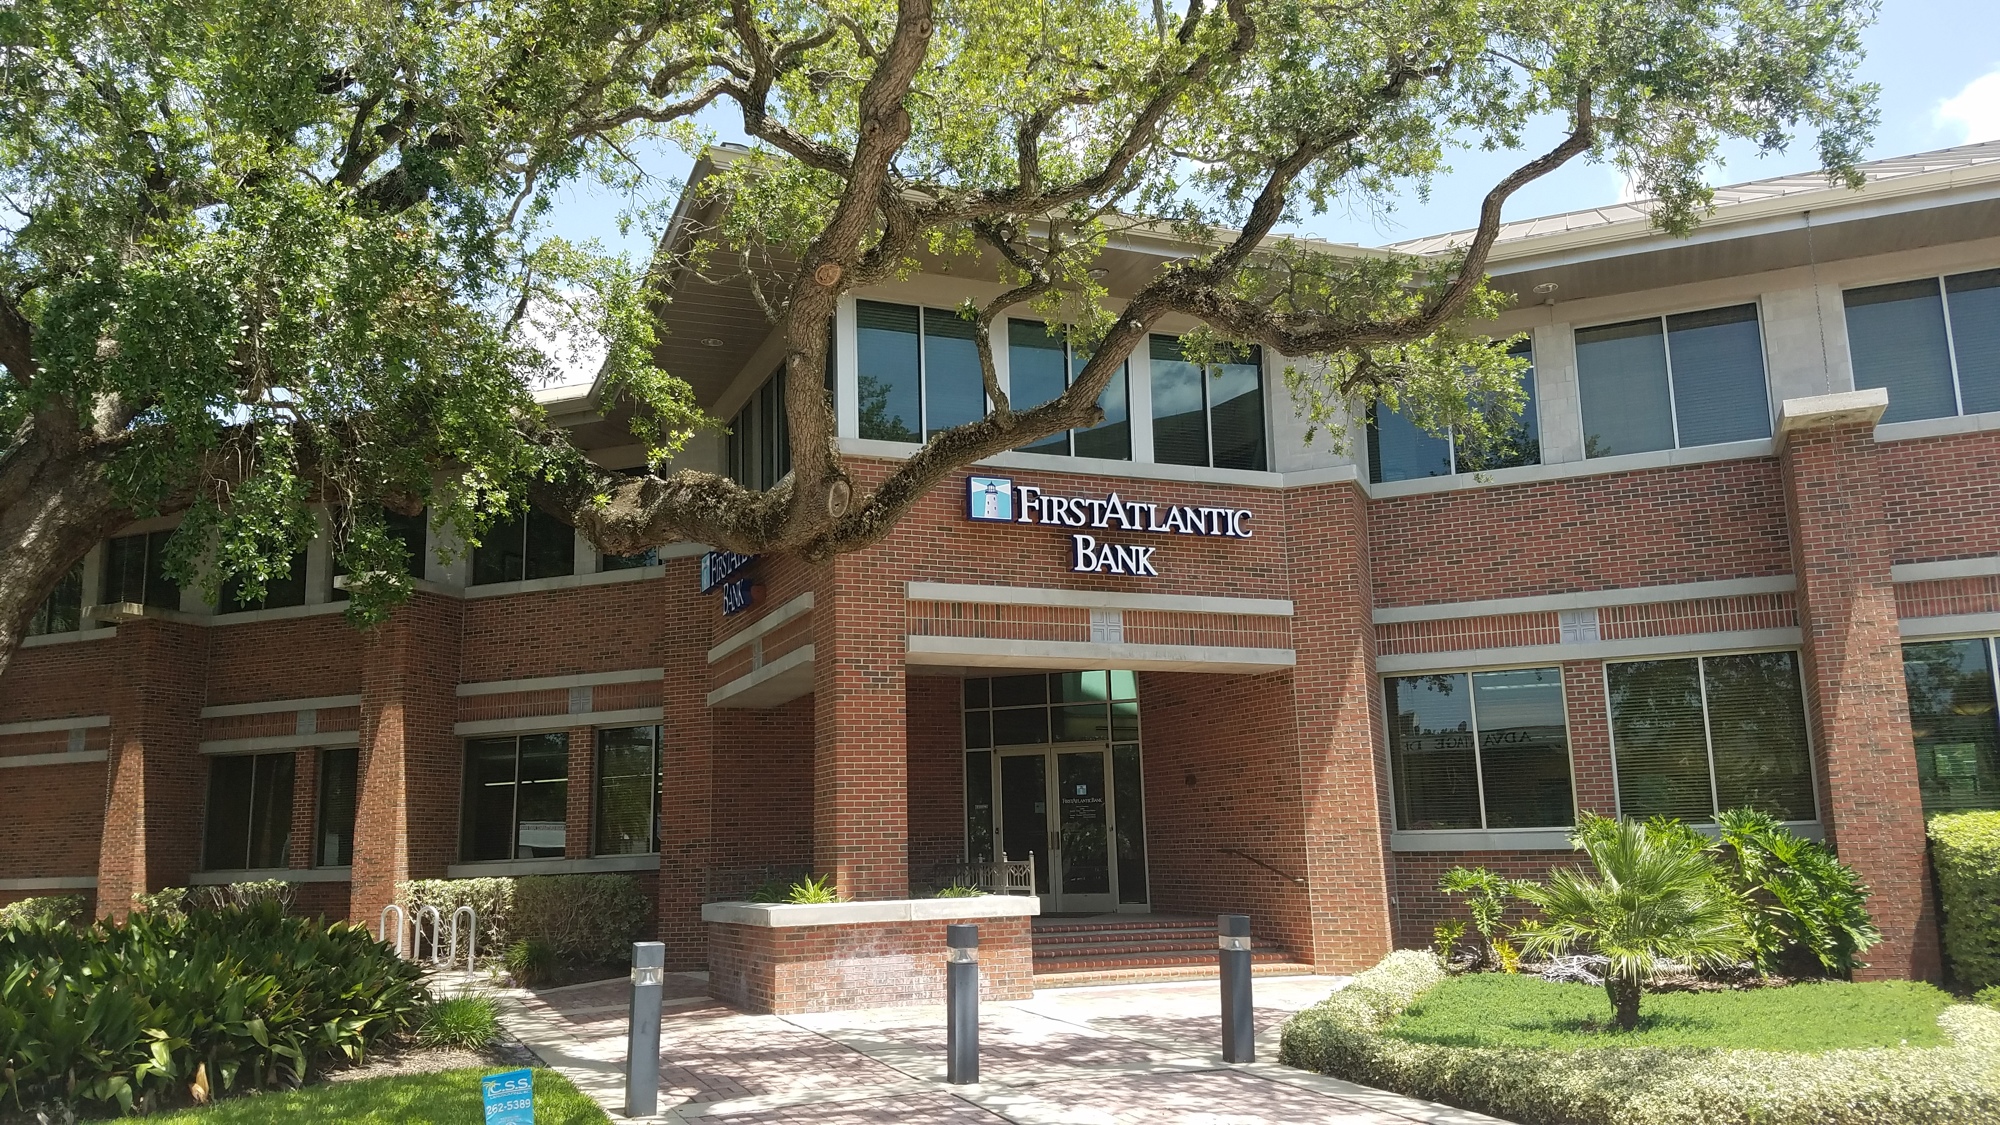 CenterState Bank will move from Downtown to the offices of FirstAtlantic Bank at 1325 Hendricks Ave. in San Marco.